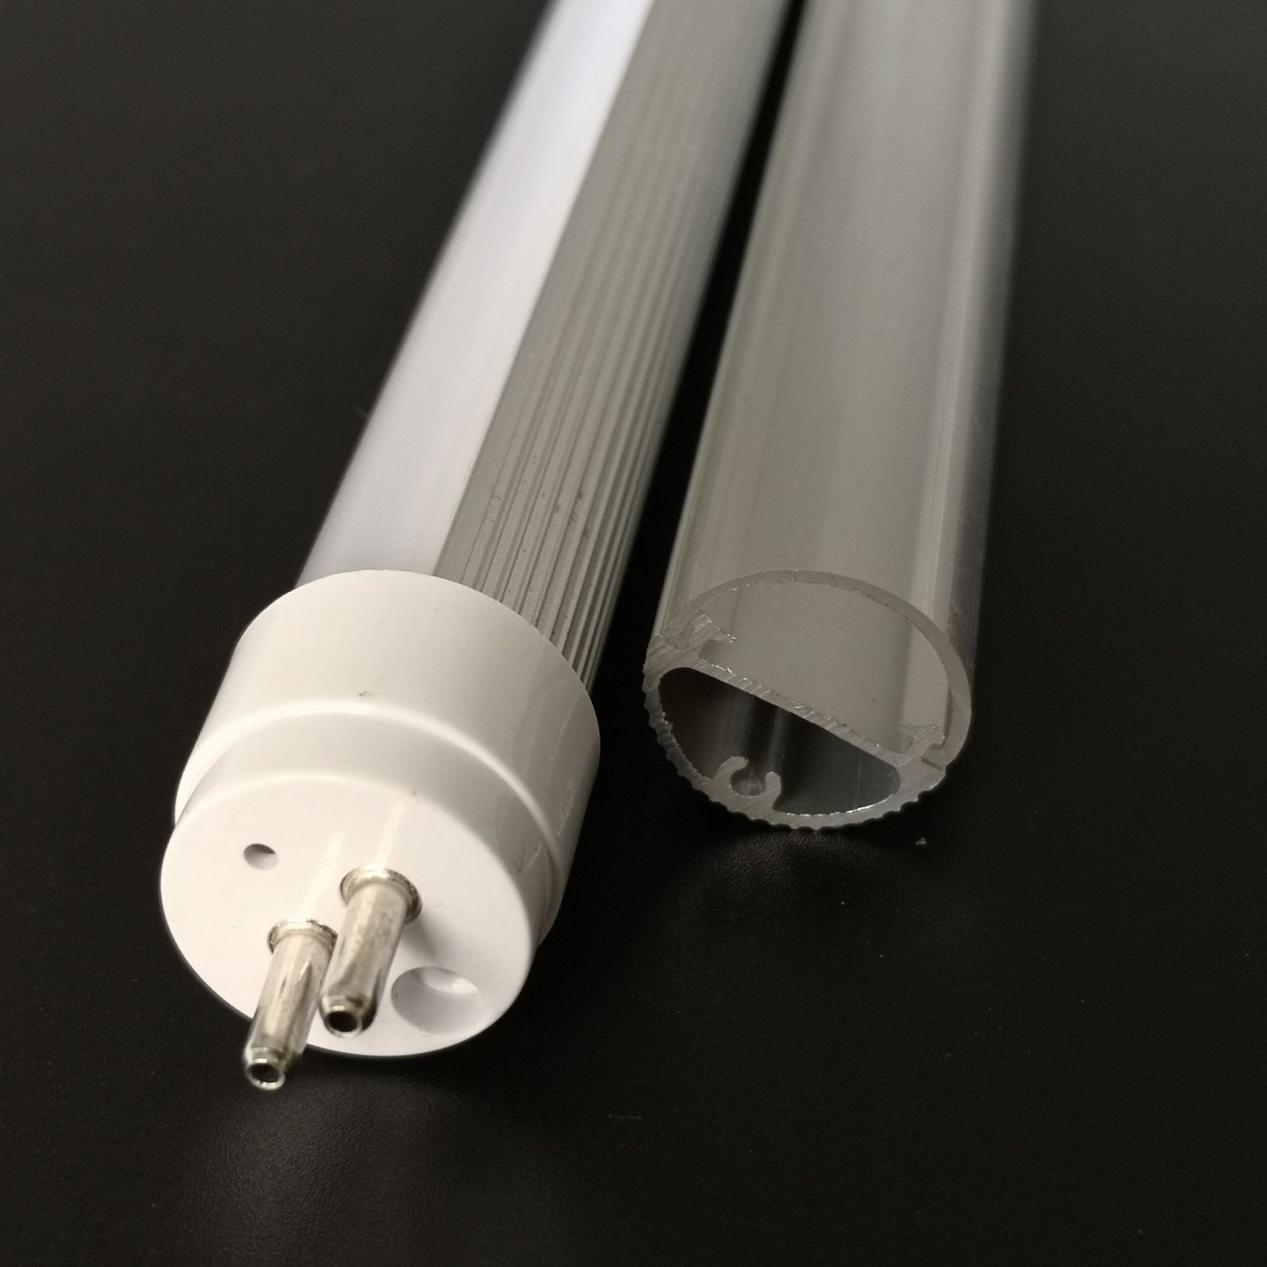 The raw material and light transmittance of LED tube housing